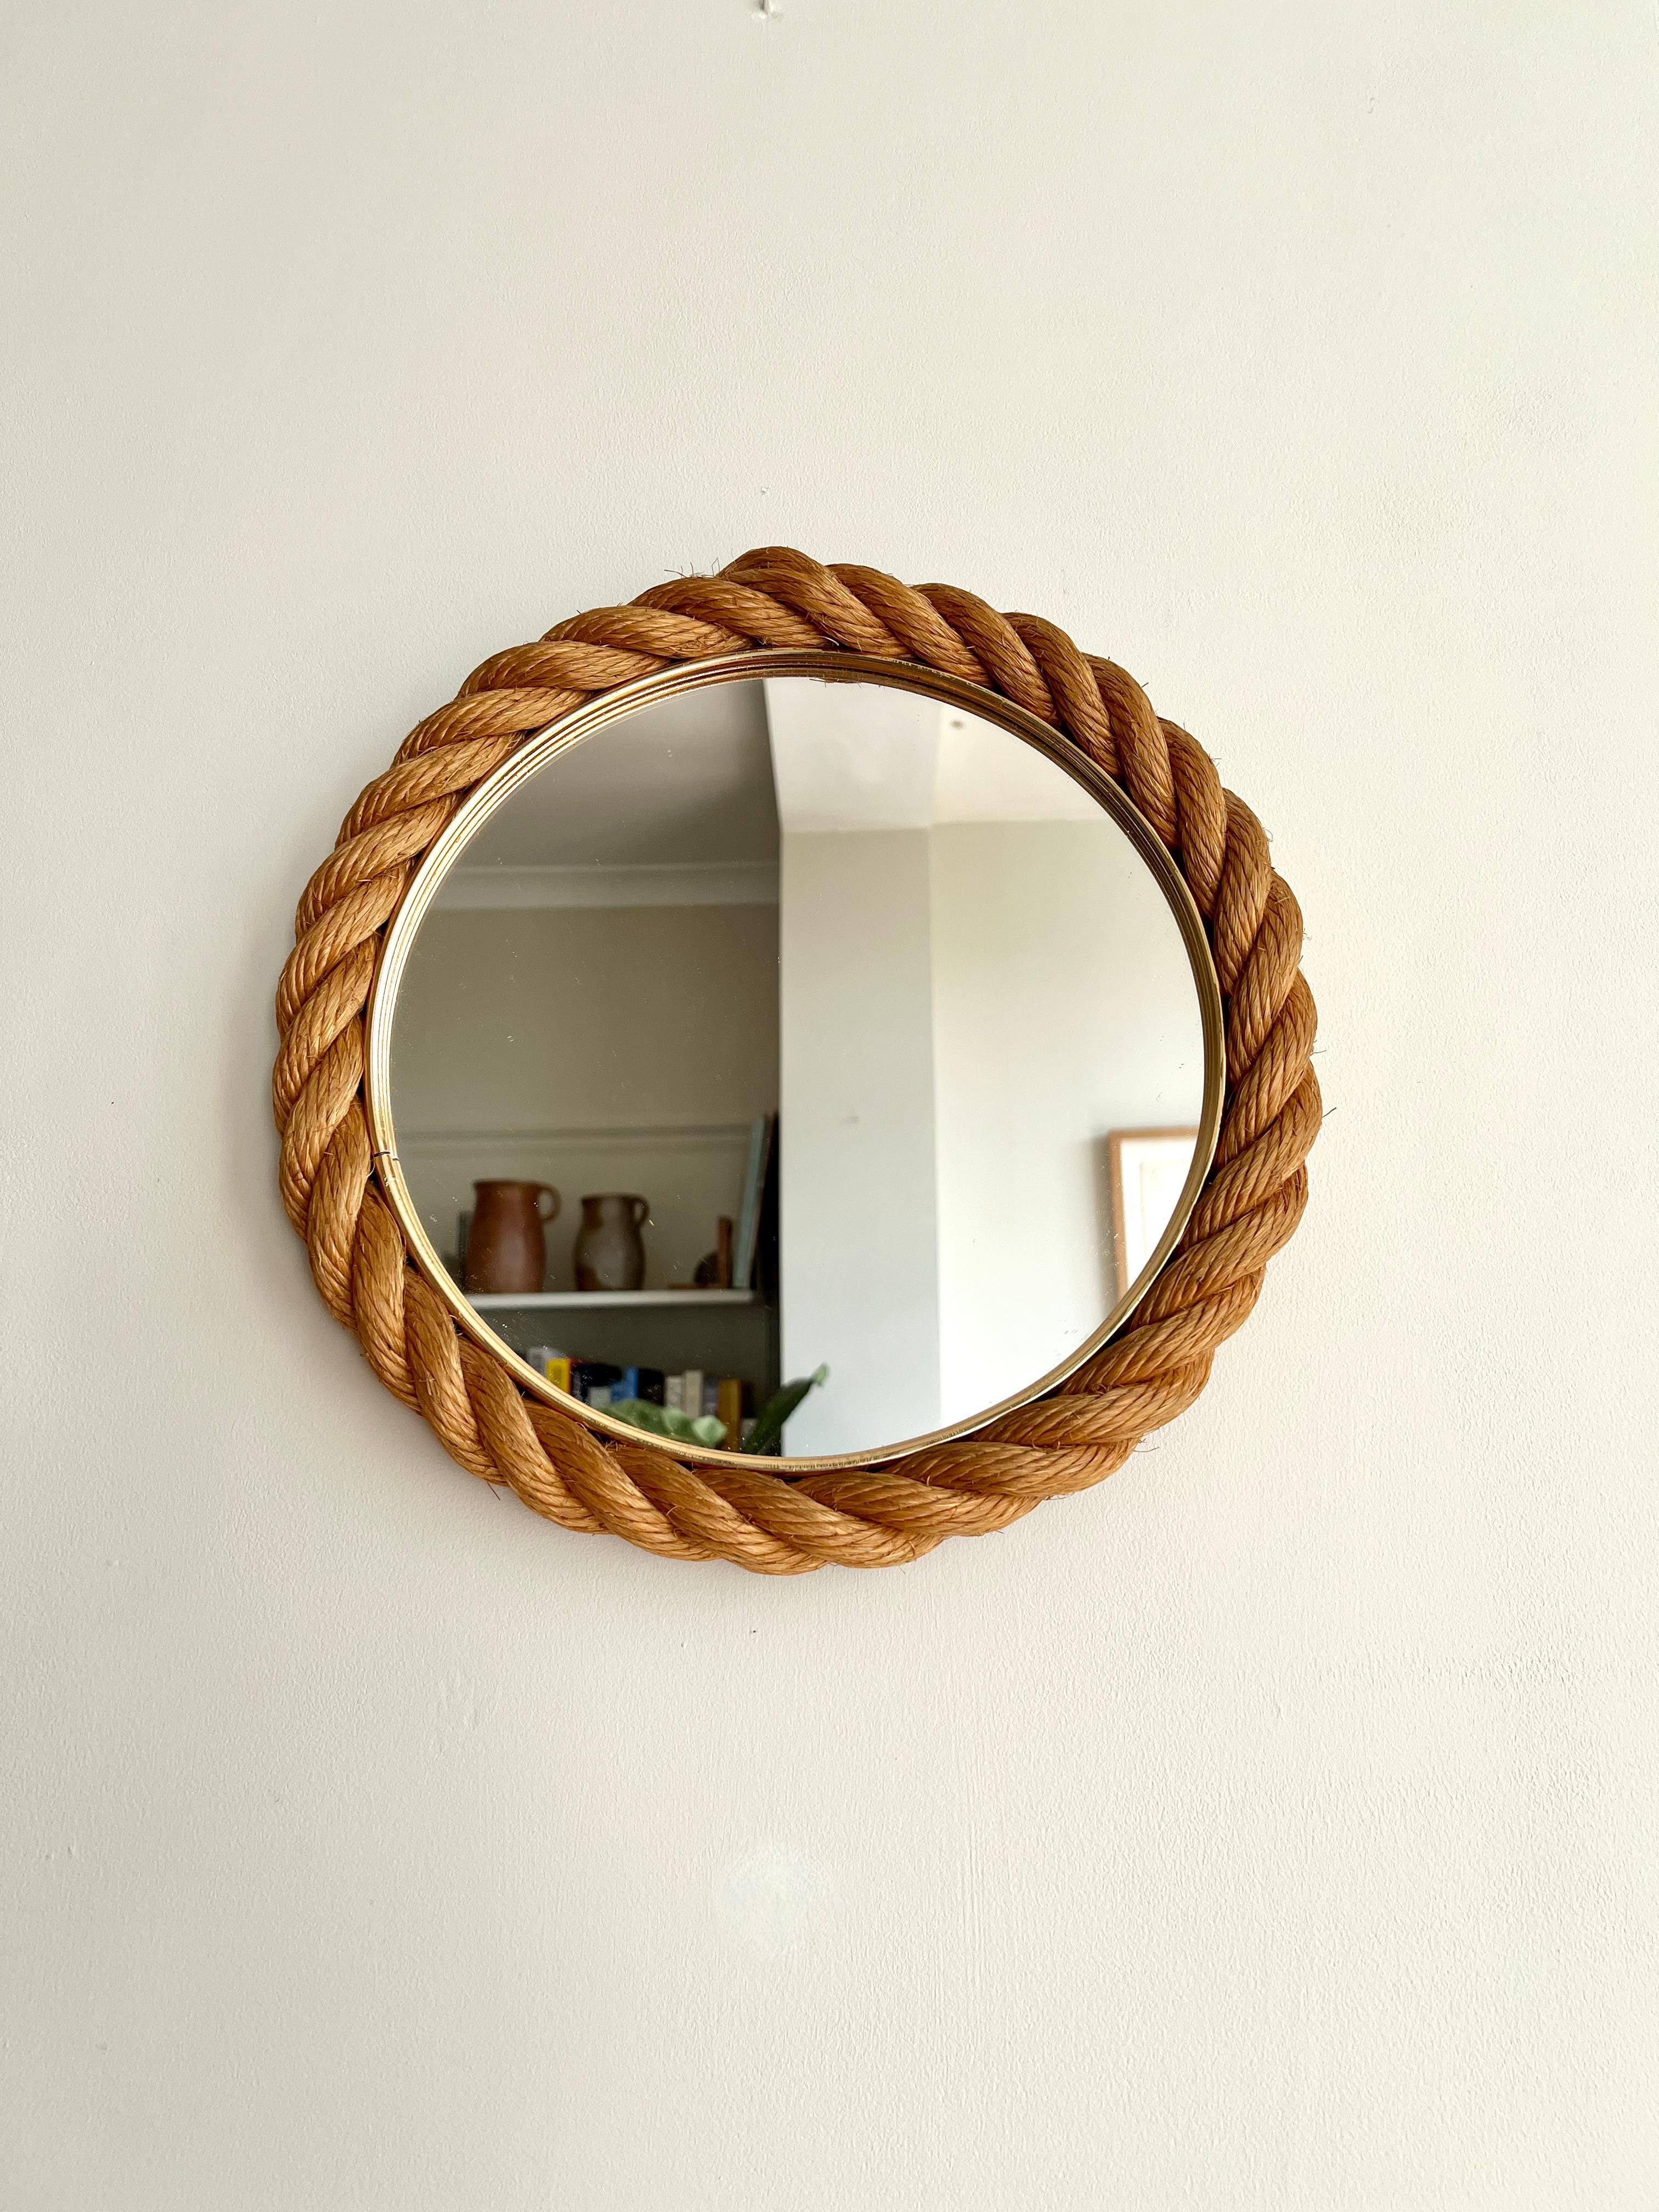 Rope Frame Mirror, Audoux & Minet, France, 1950-1960 For Sale 2